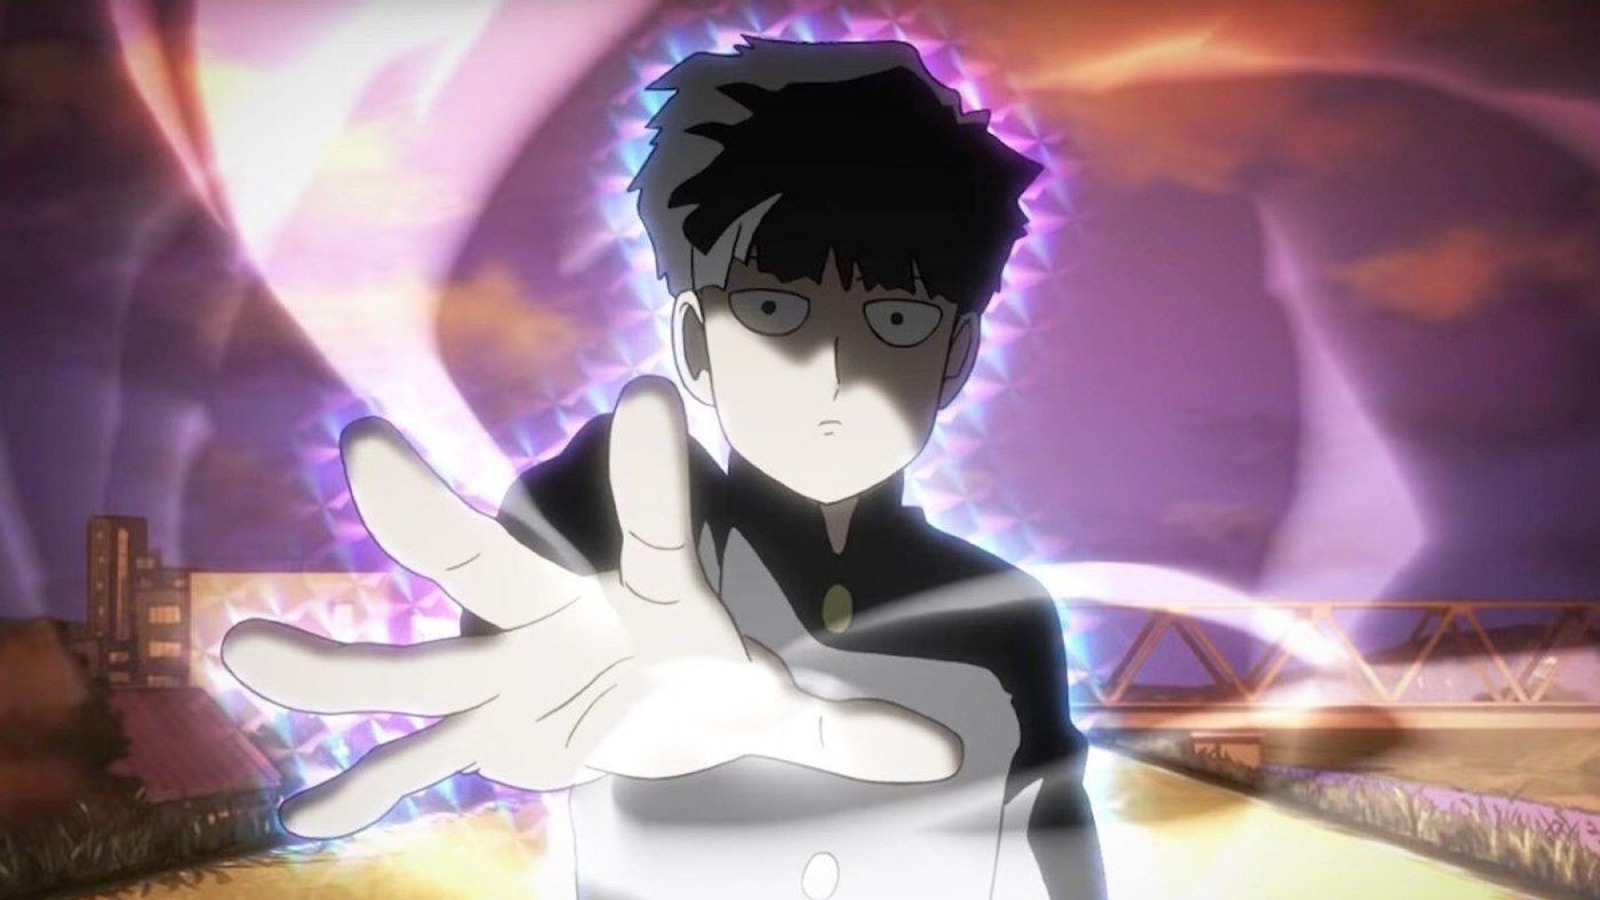 Mob Psycho 100 Delivers Stunning Action, But Also An Endearing Story Of  Empathy And Compassion